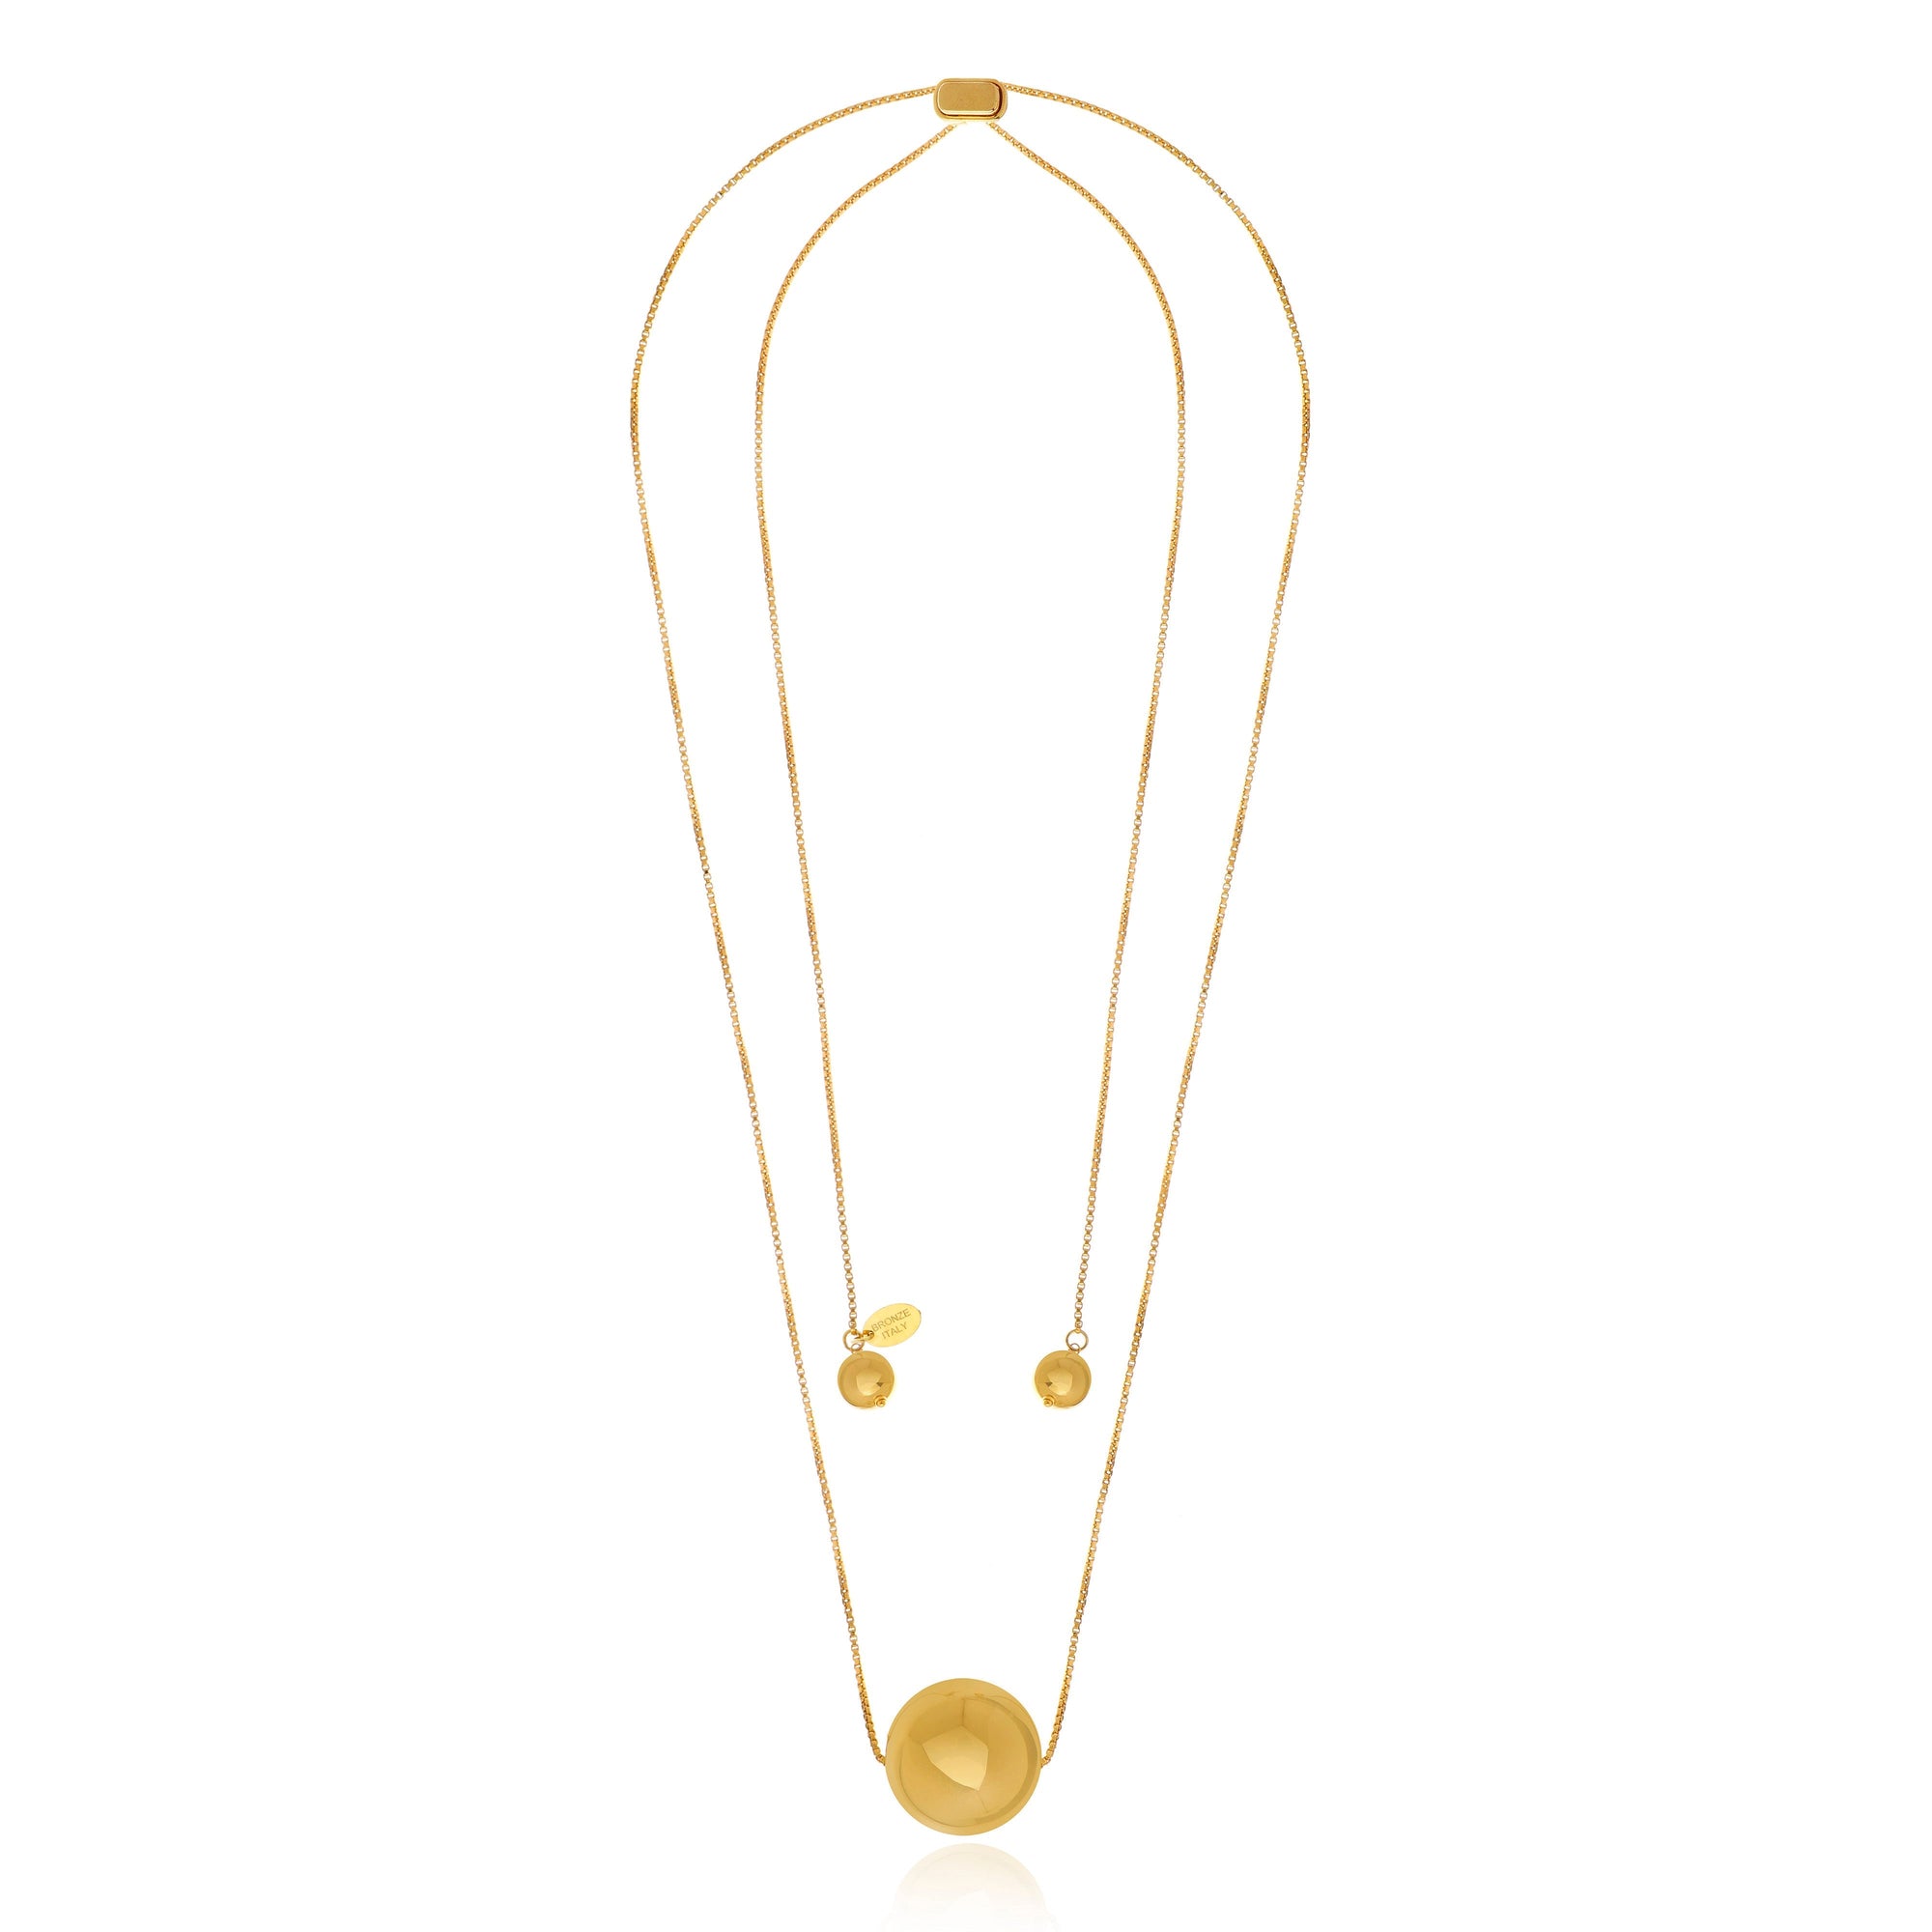 Gravity Necklace - Gold